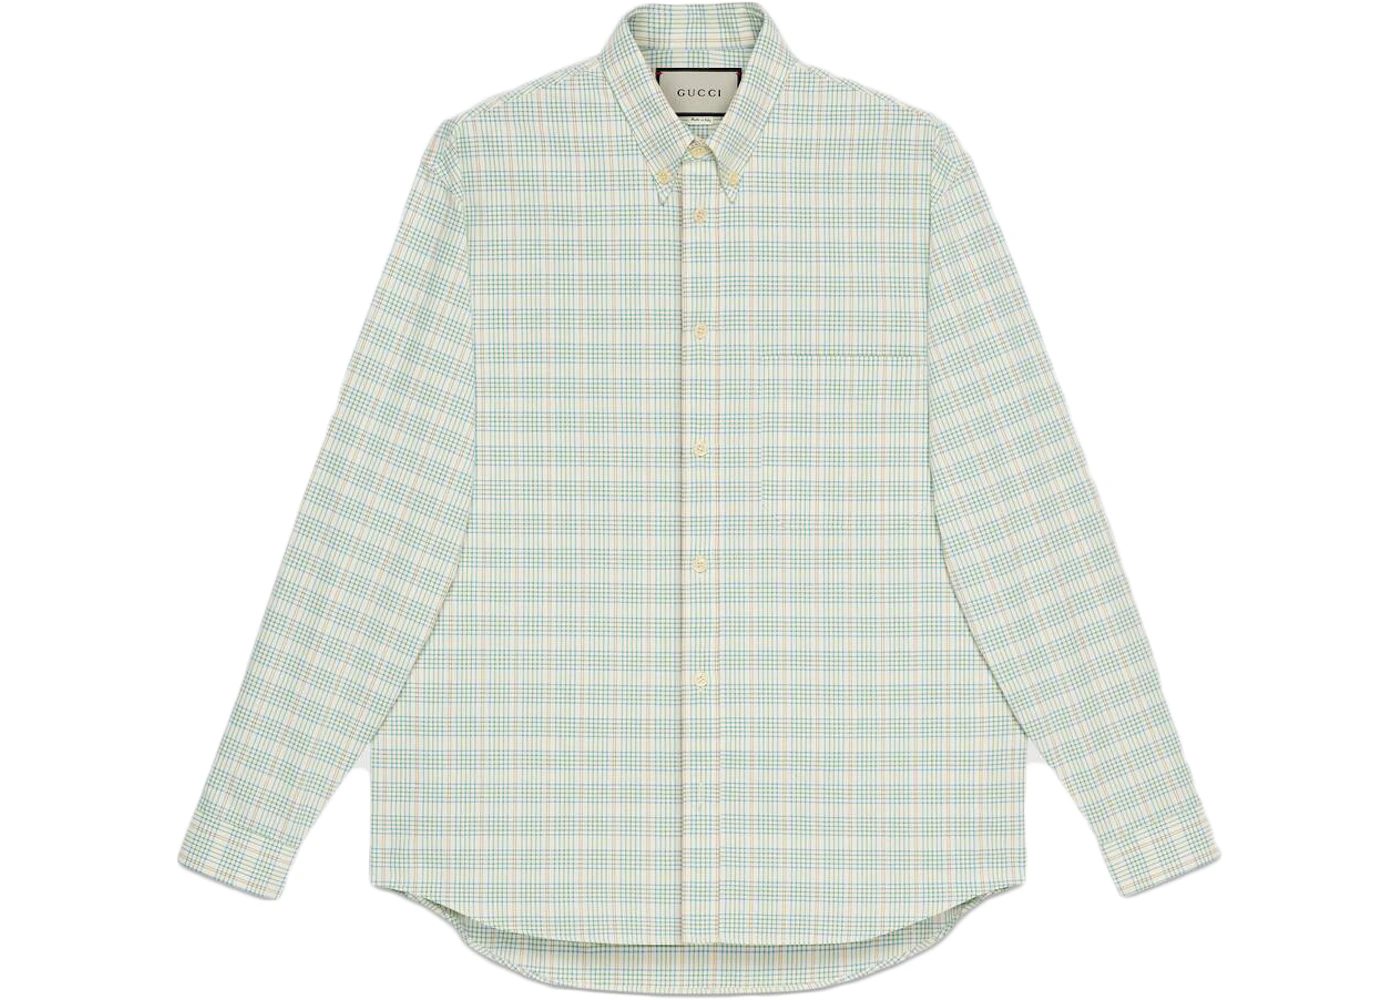 Gucci x The North Face Button-Down Shirt White/Green Men's - SS21 - US